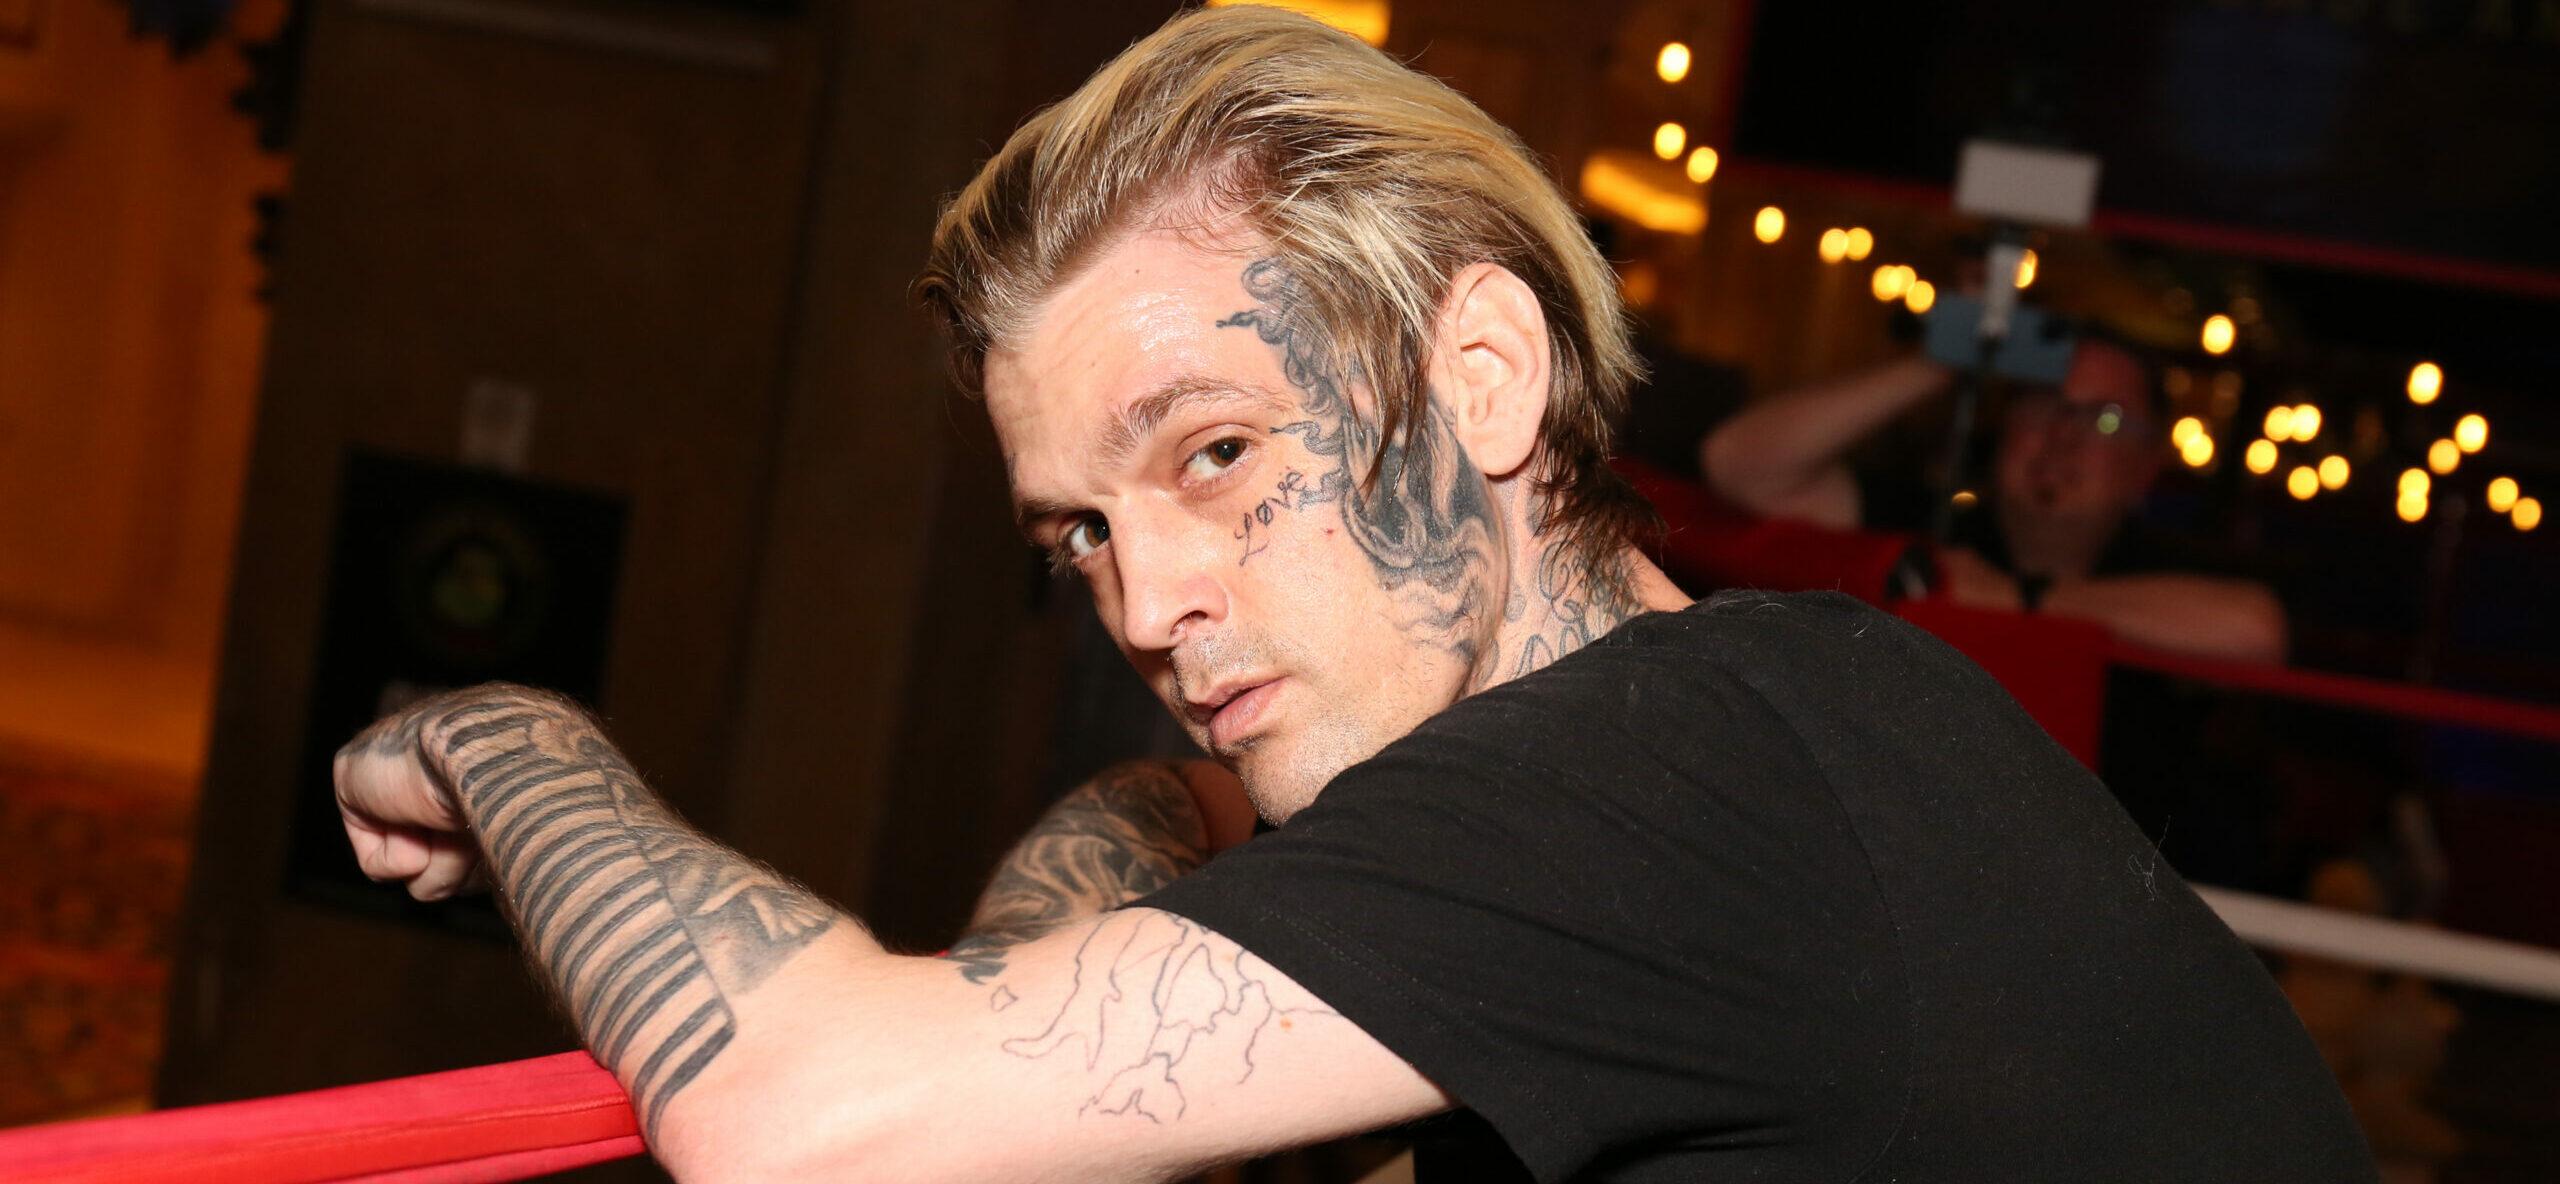 Singer Aaron Carter’s Home Where He Passed Away Is Back On The Market